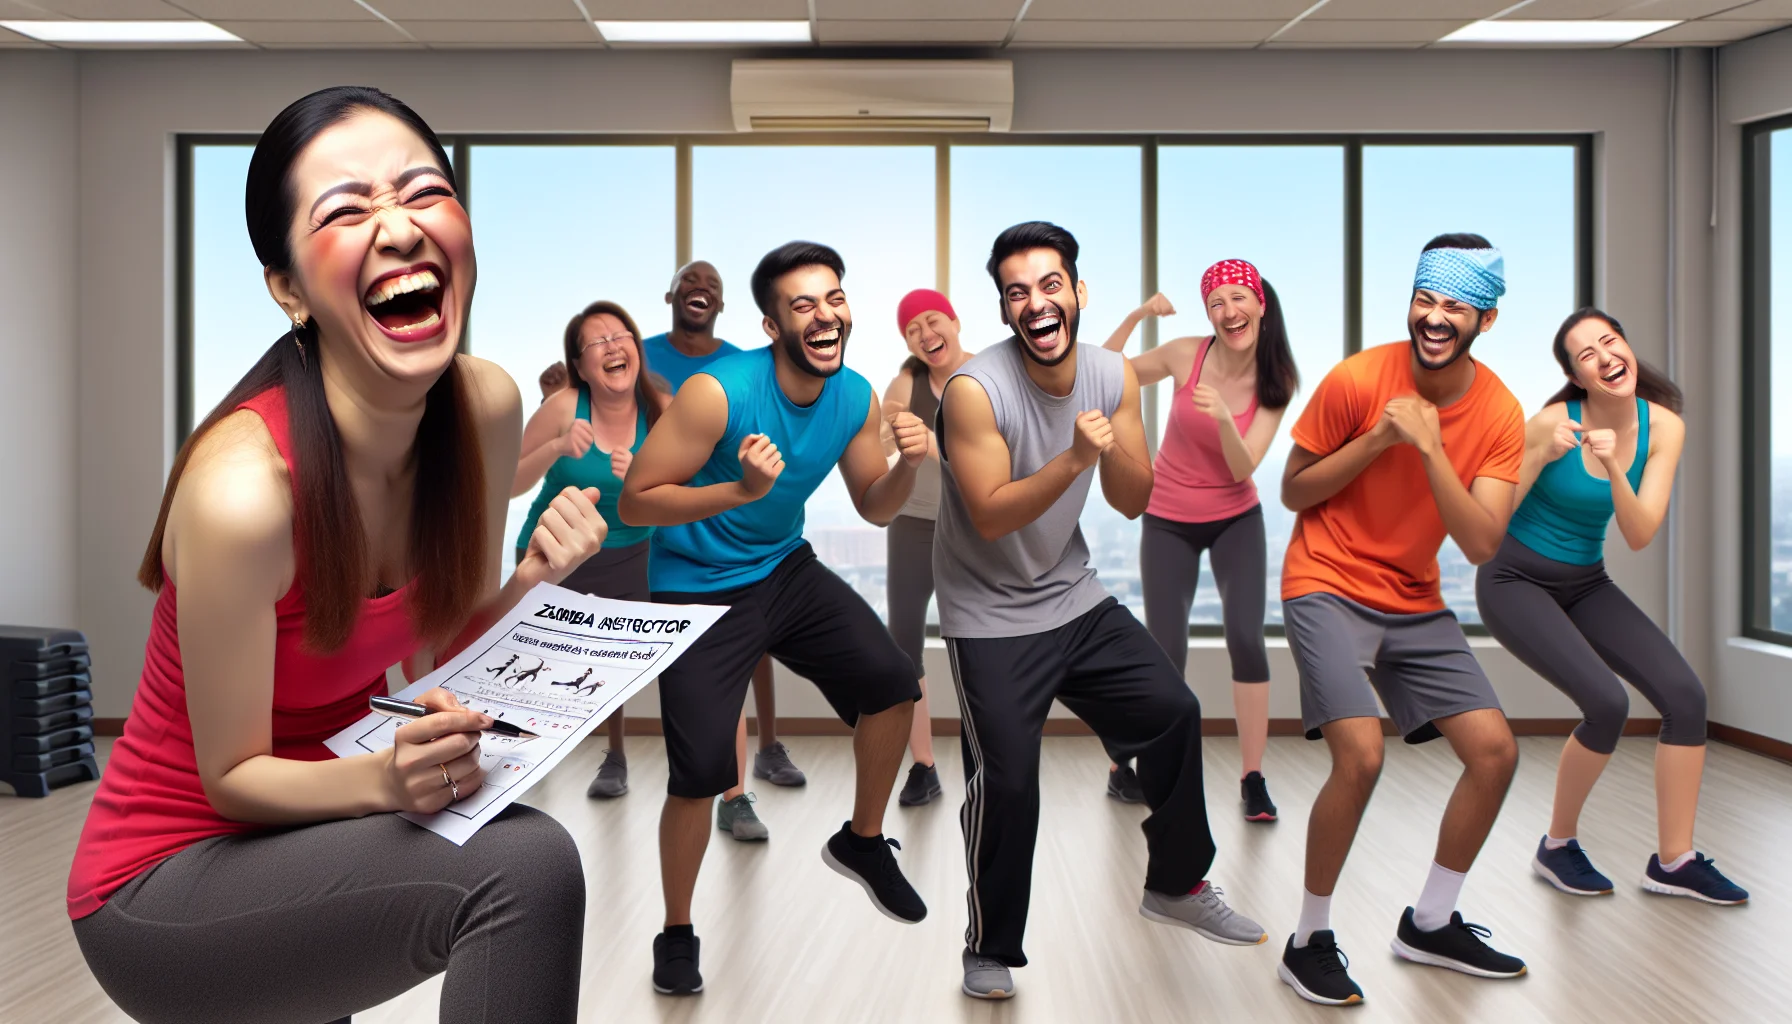 Create an amusing image that showcases a zumba instructor role. The scene involves a typical gym environment where a South Asian female zumba instructor with an infectious laughter leads a multi-ethnic group of people in a zumba session. To add humor, show some participants attempting humorous dance moves or exercise positions that evoke laughter among the group, encouraging a fun-filled atmosphere that promotes exercise and fitness. The purpose of the image is to inspire people to undertake regular exercise through zumba.